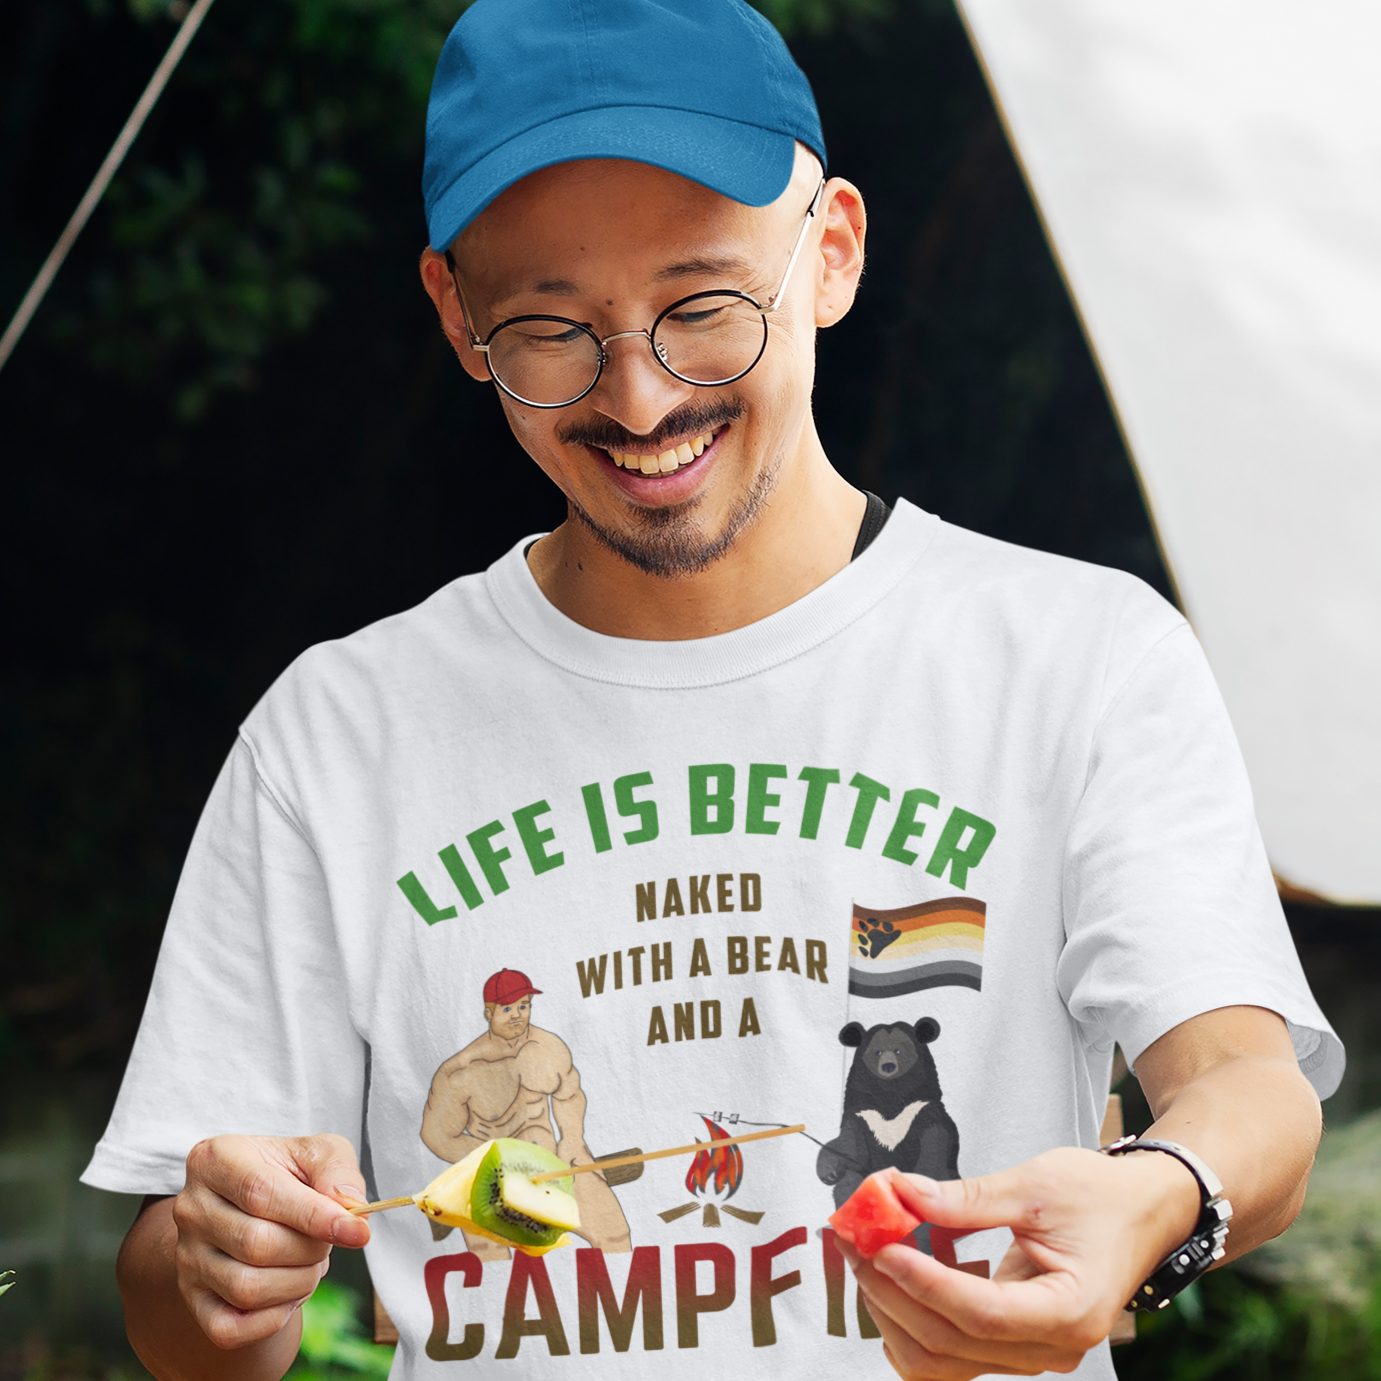 Life is Better Naked with a Bear and a Campfire Adult T-Shirt